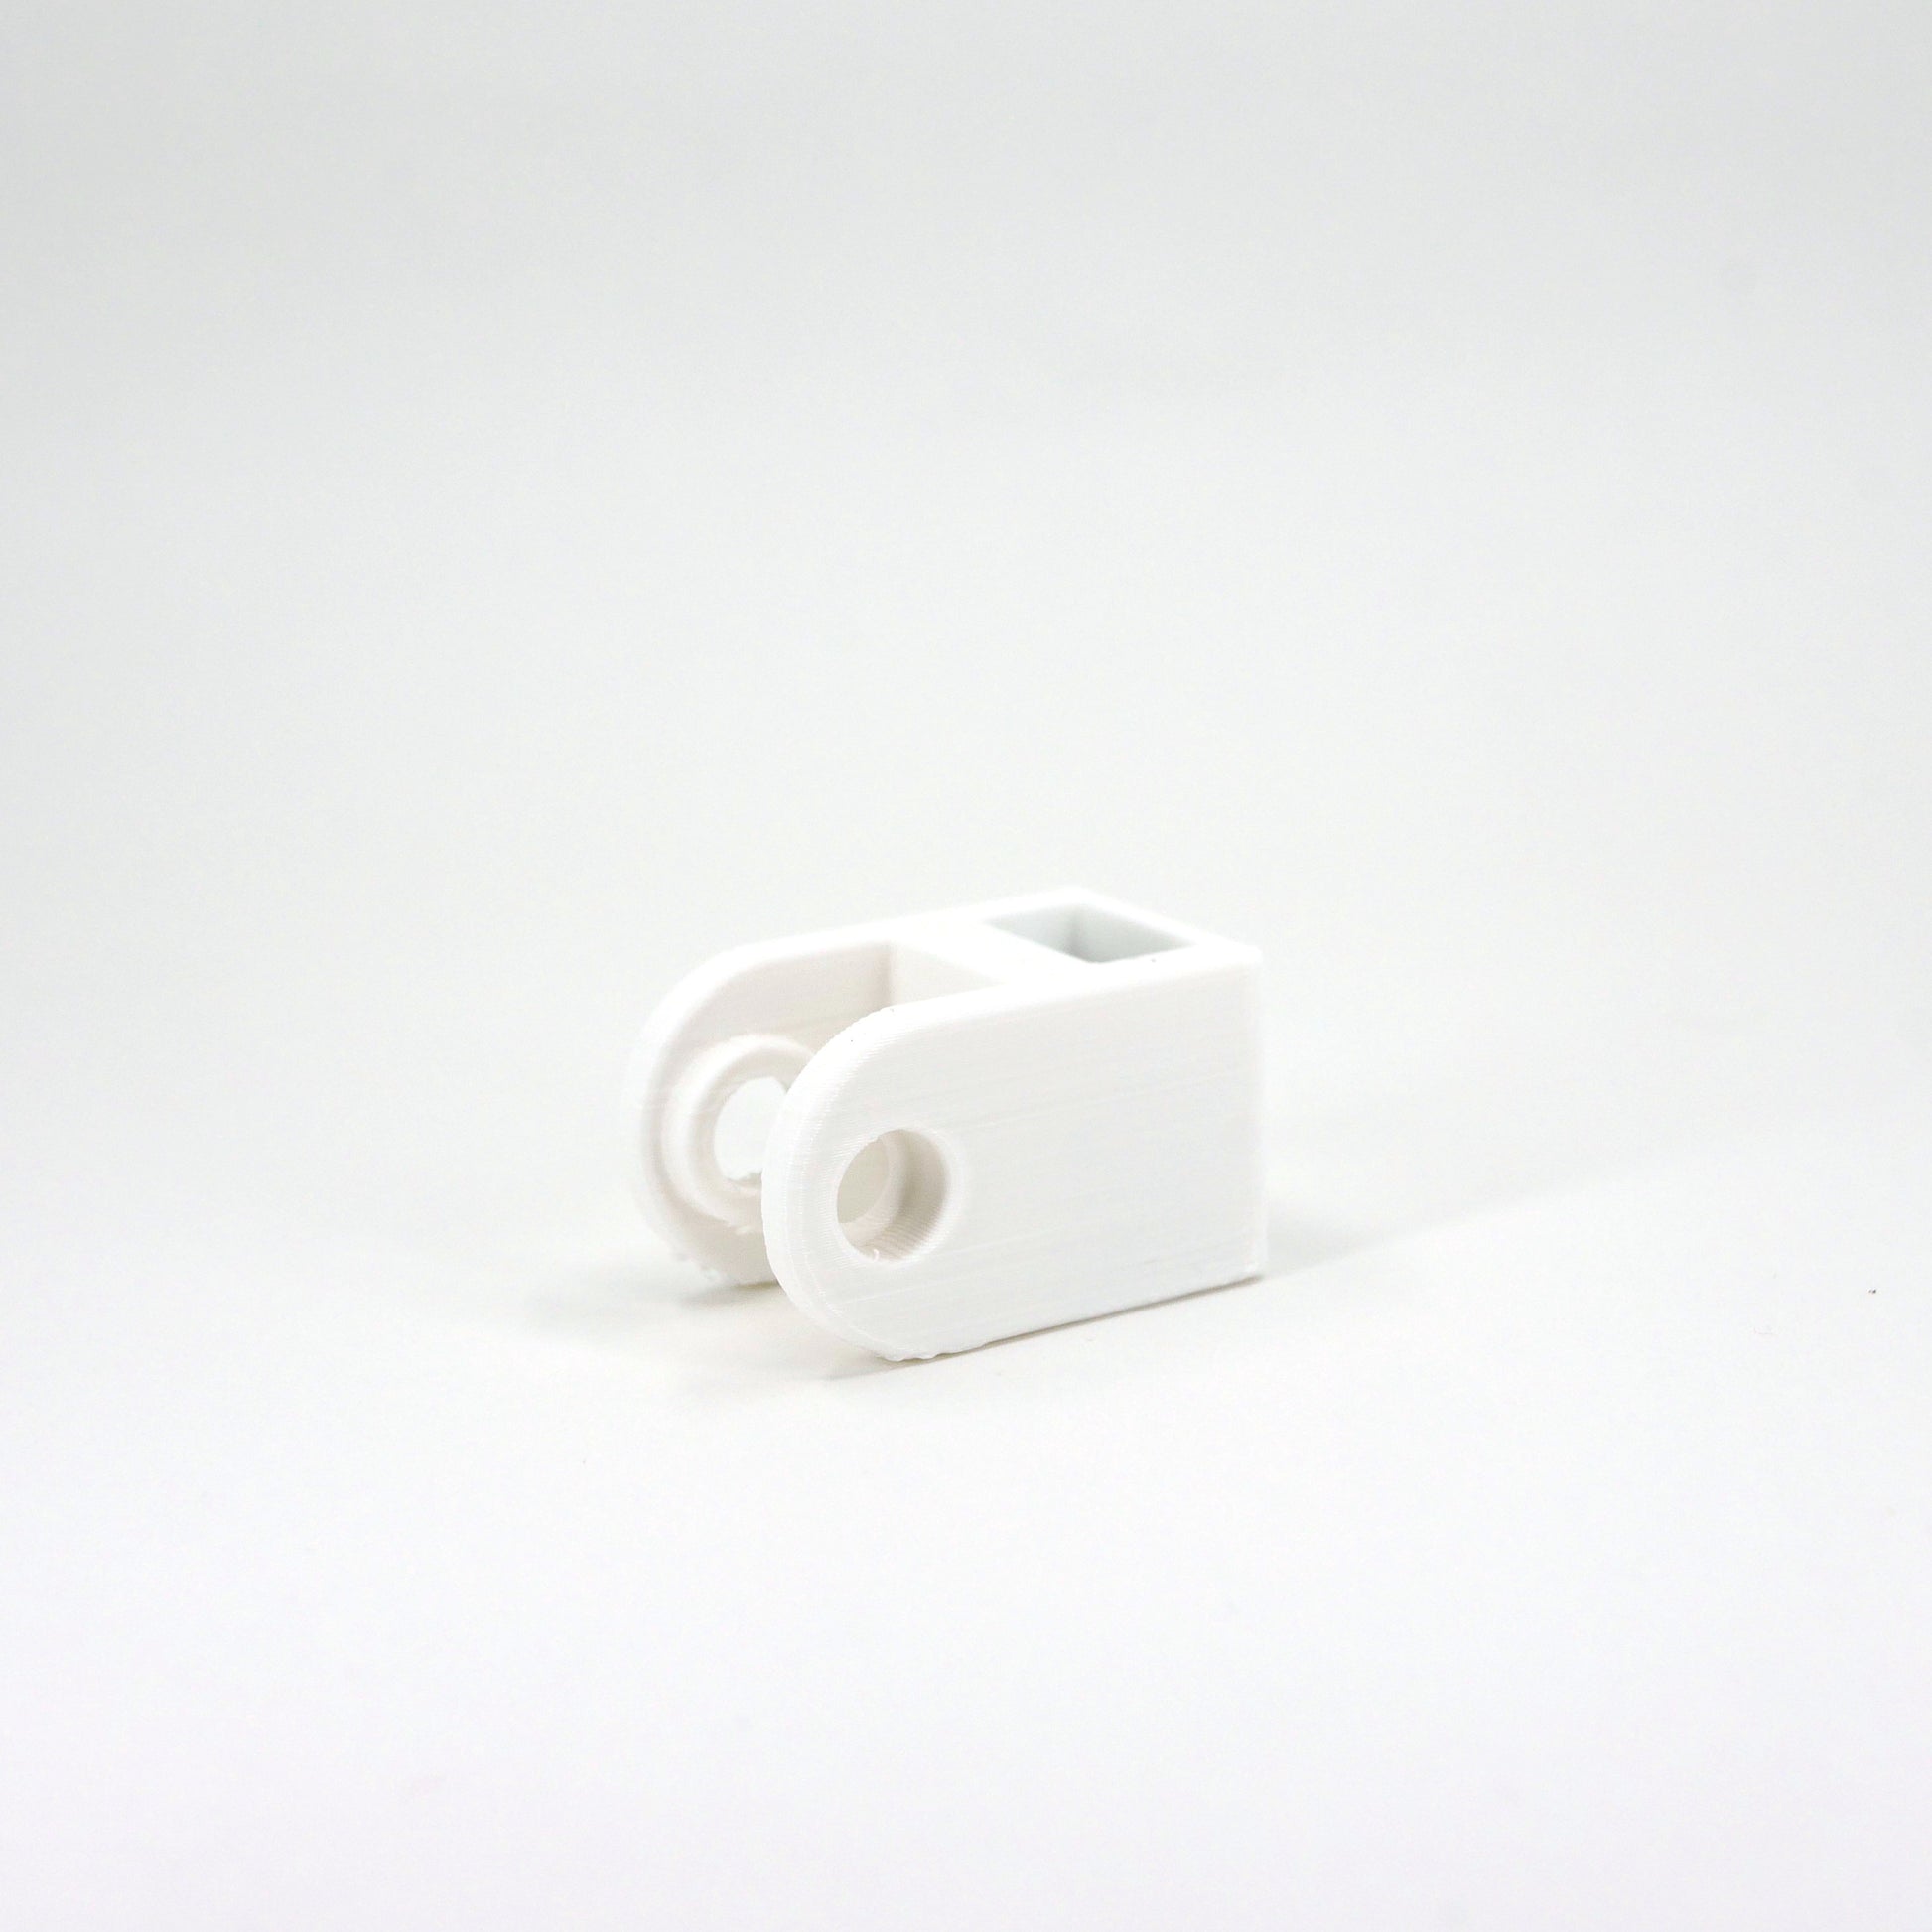 A white HyperX DuoCast microphone mount adapter.